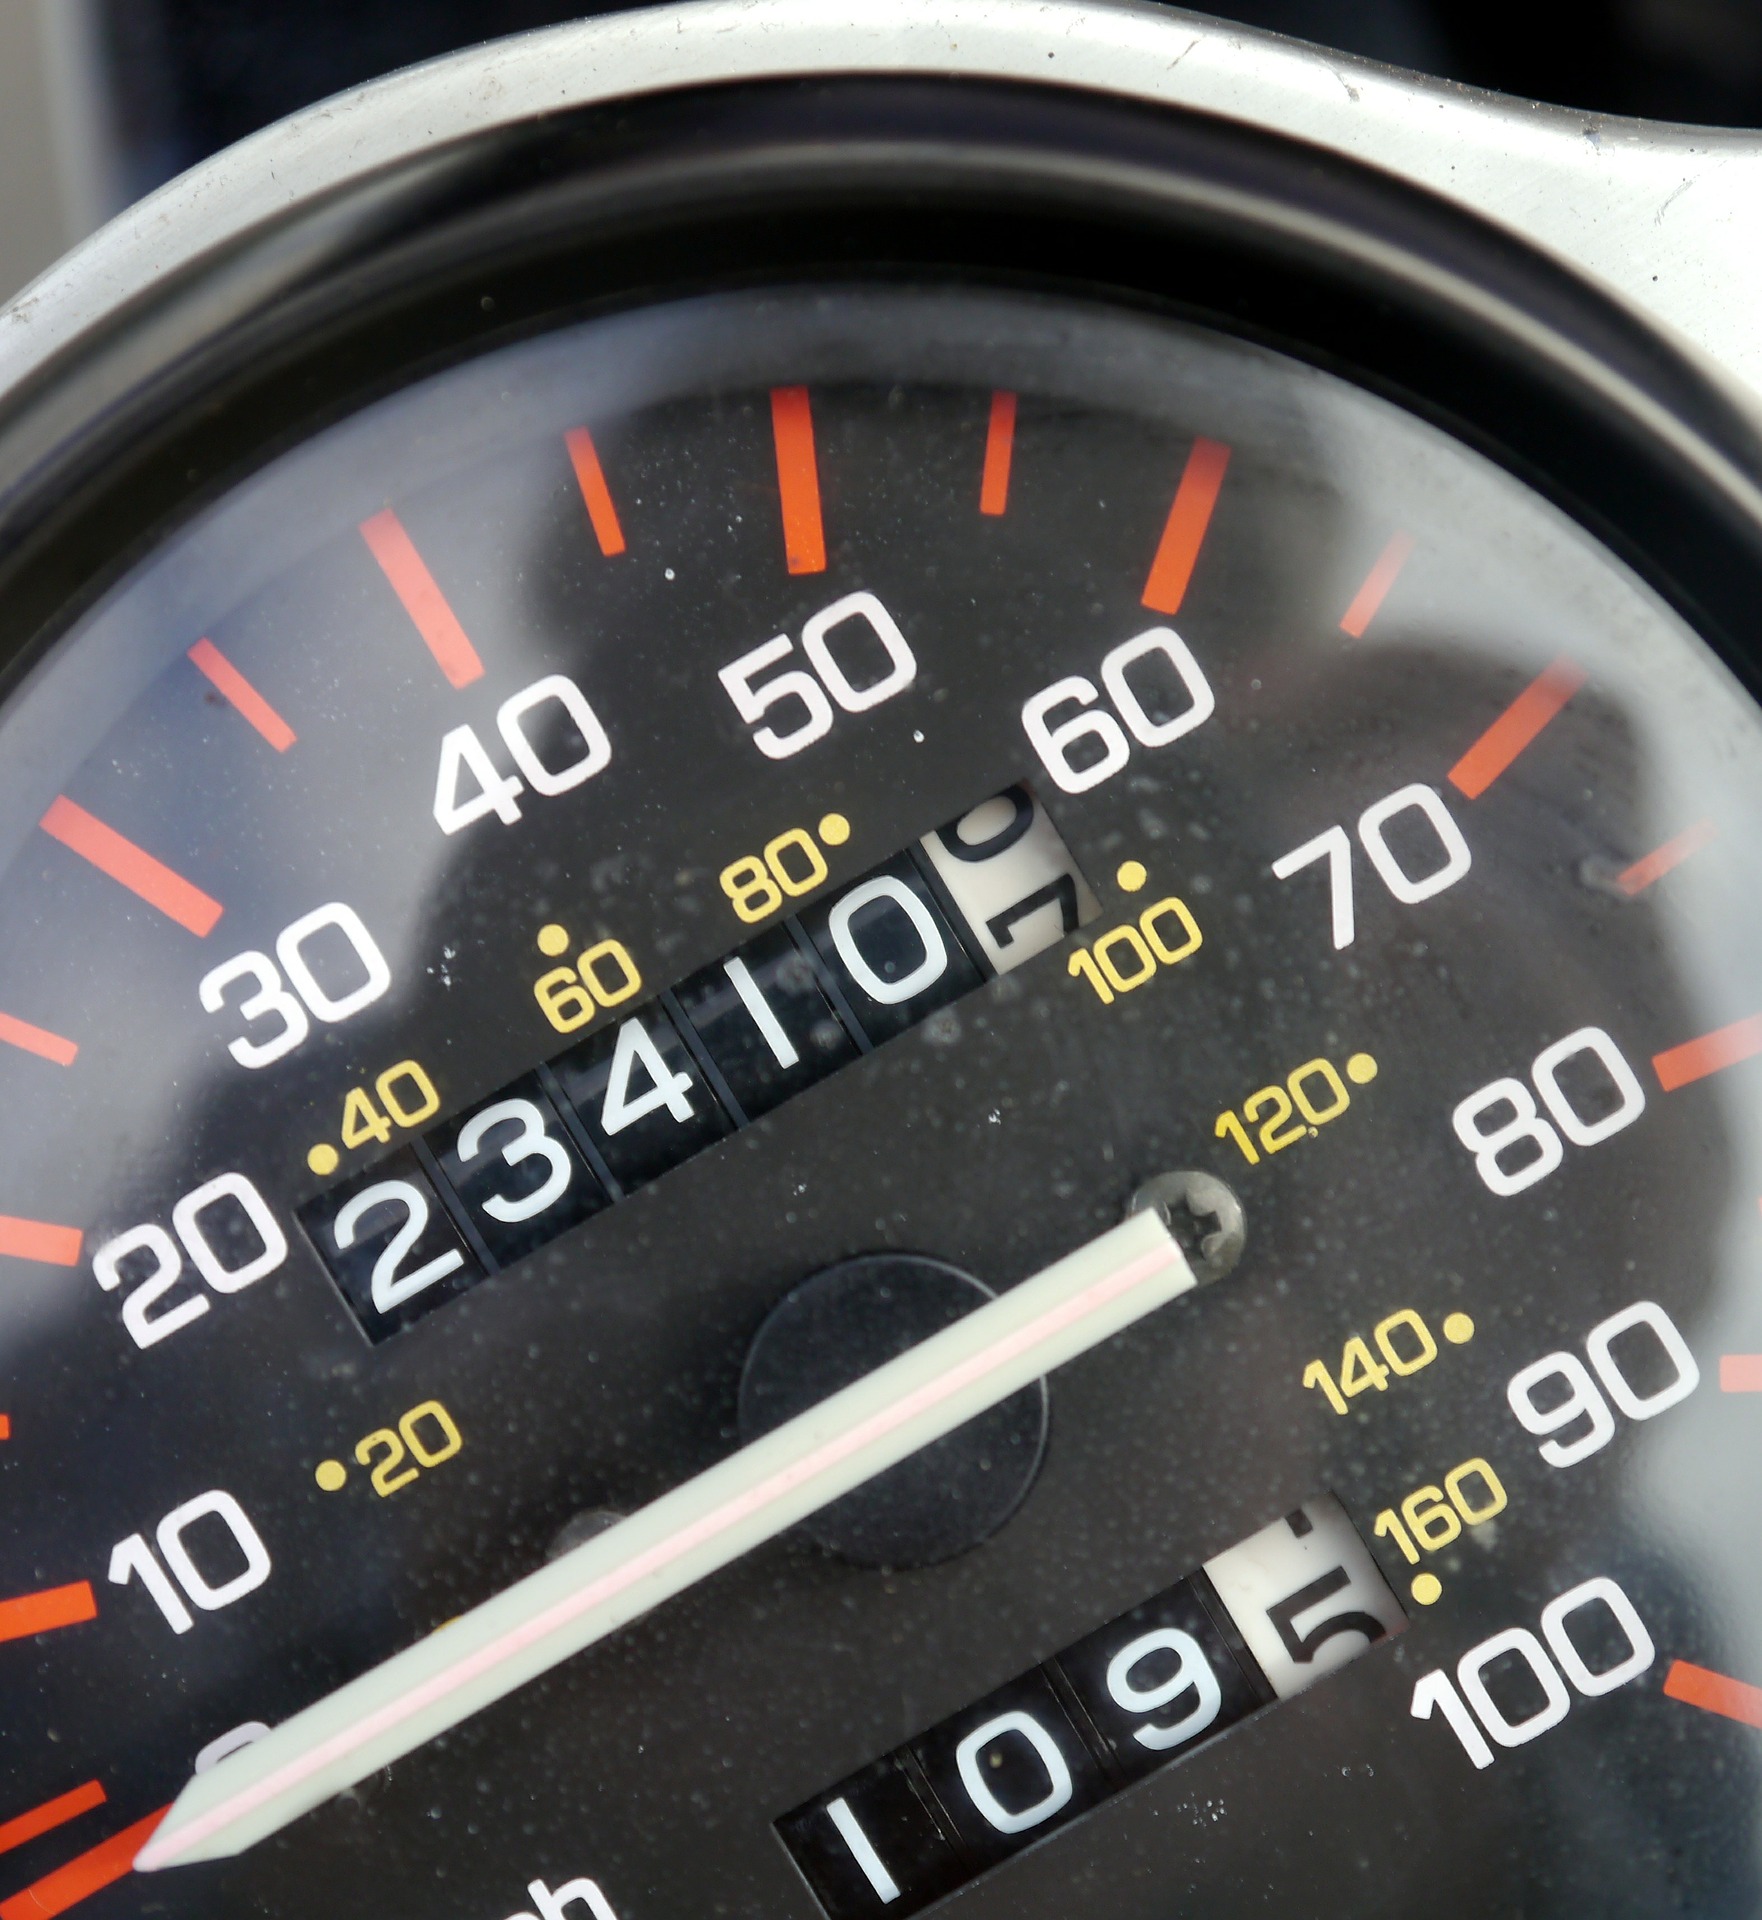 Easy Ways to Track Mileage for Your Mileage Tax Deduction